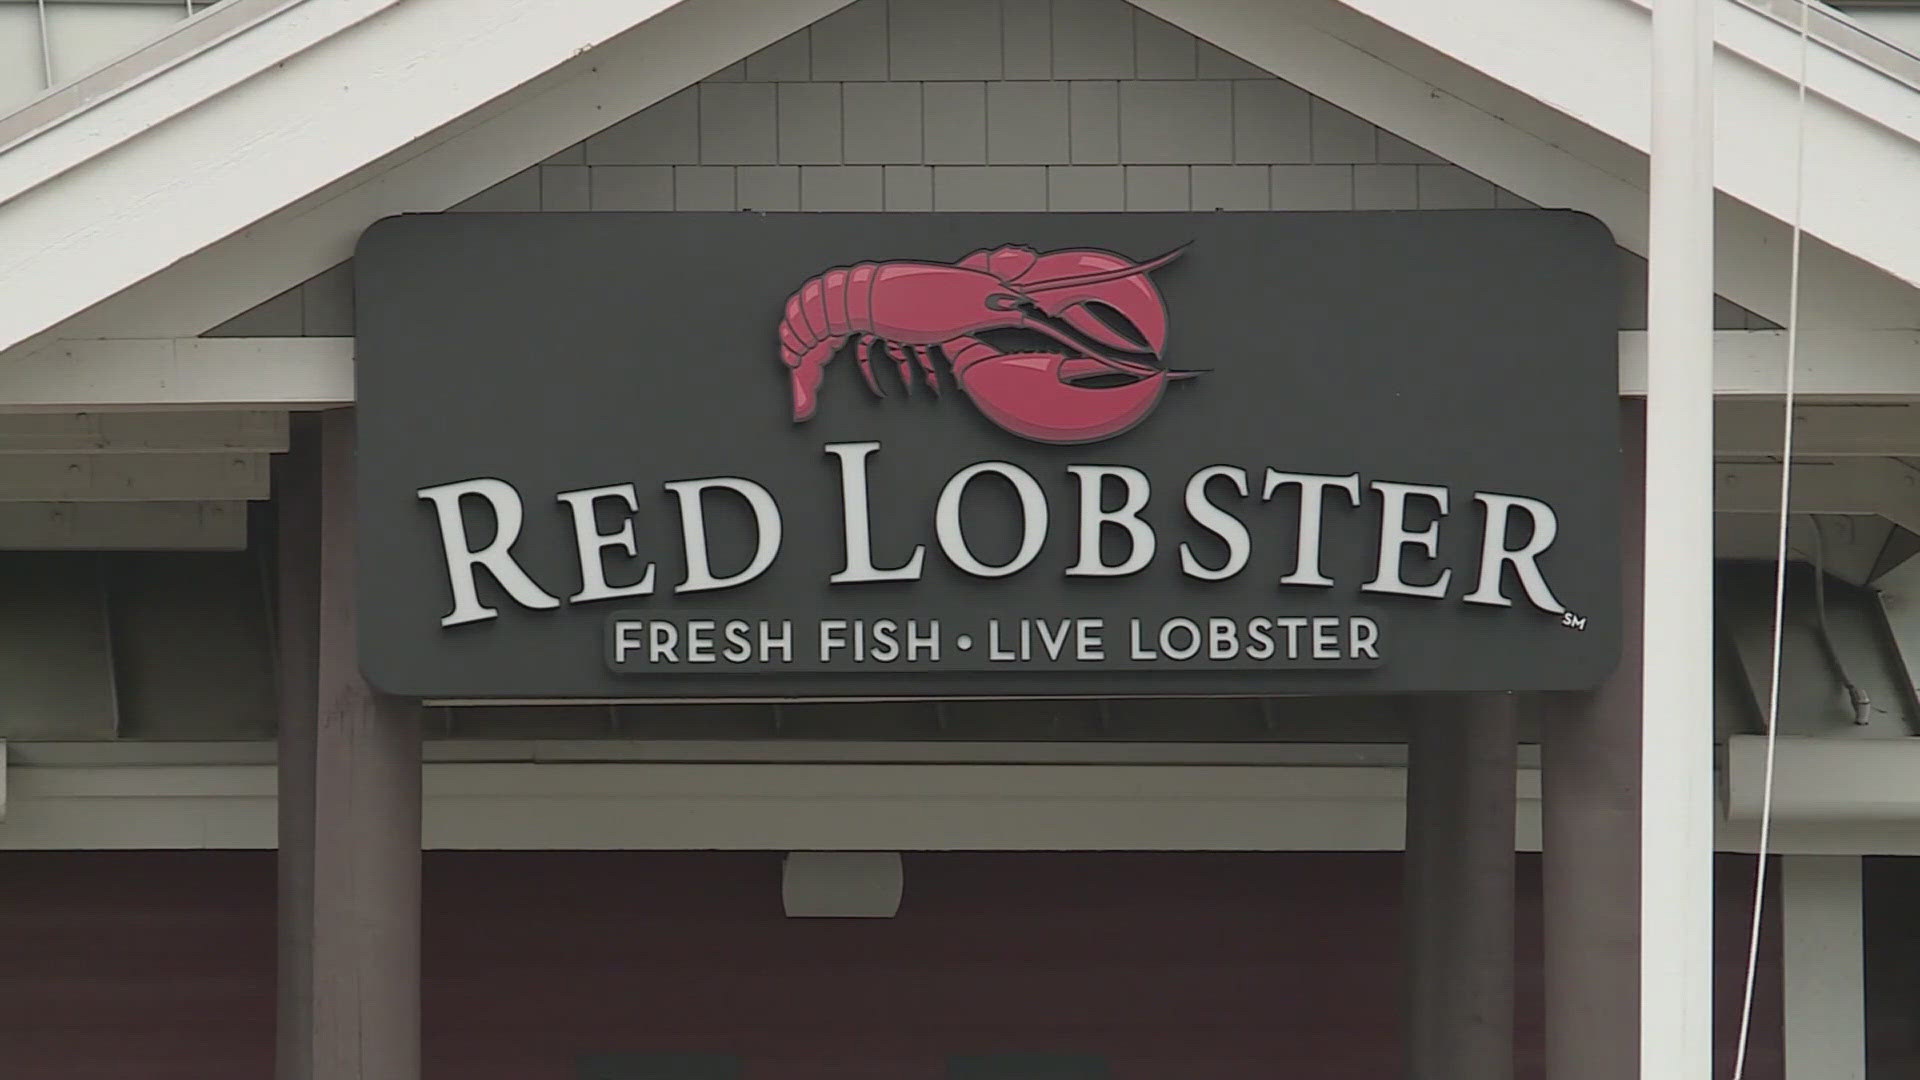 New bankruptcy documents revealed dozens of Red Lobster locations that could be on the chopping block.